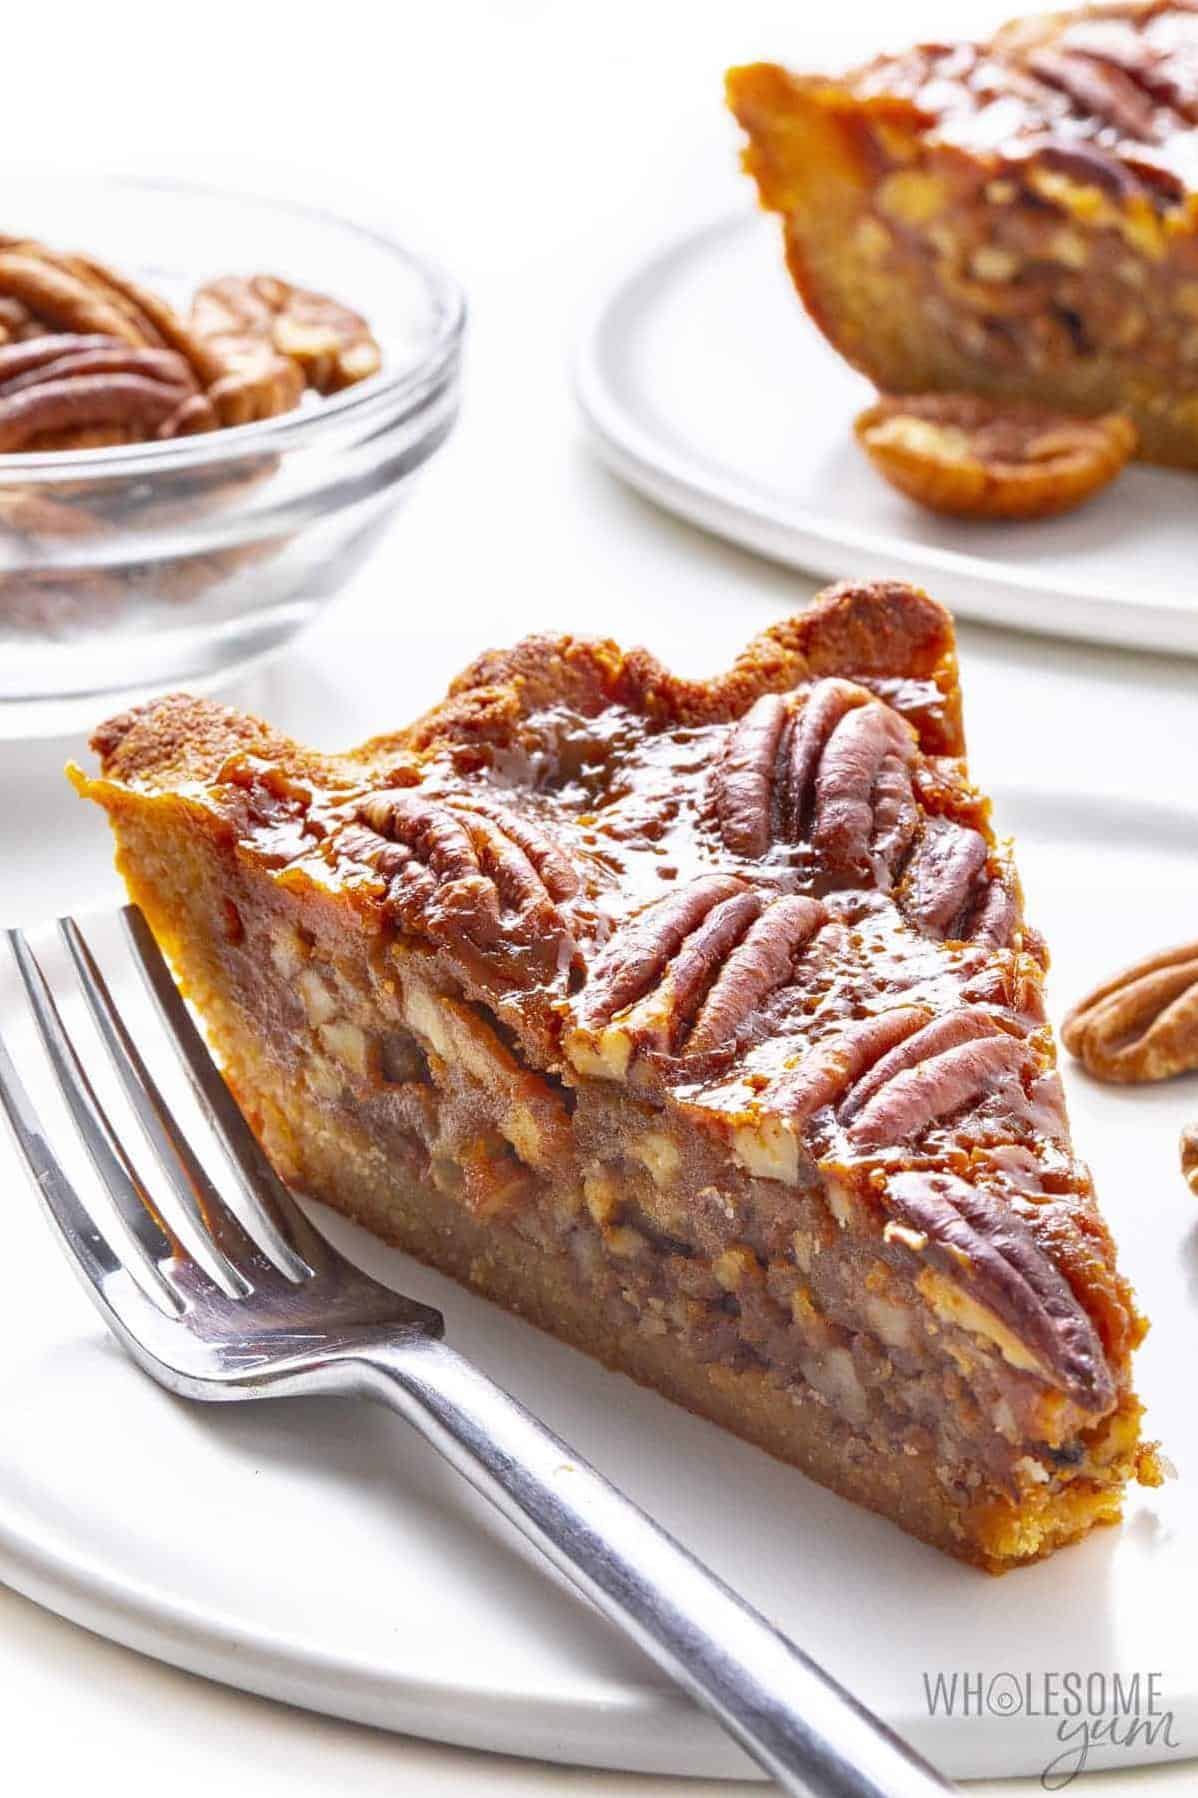  Get ready to satisfy your sweet tooth with this delicious Sugar-Free Pecan Pie!